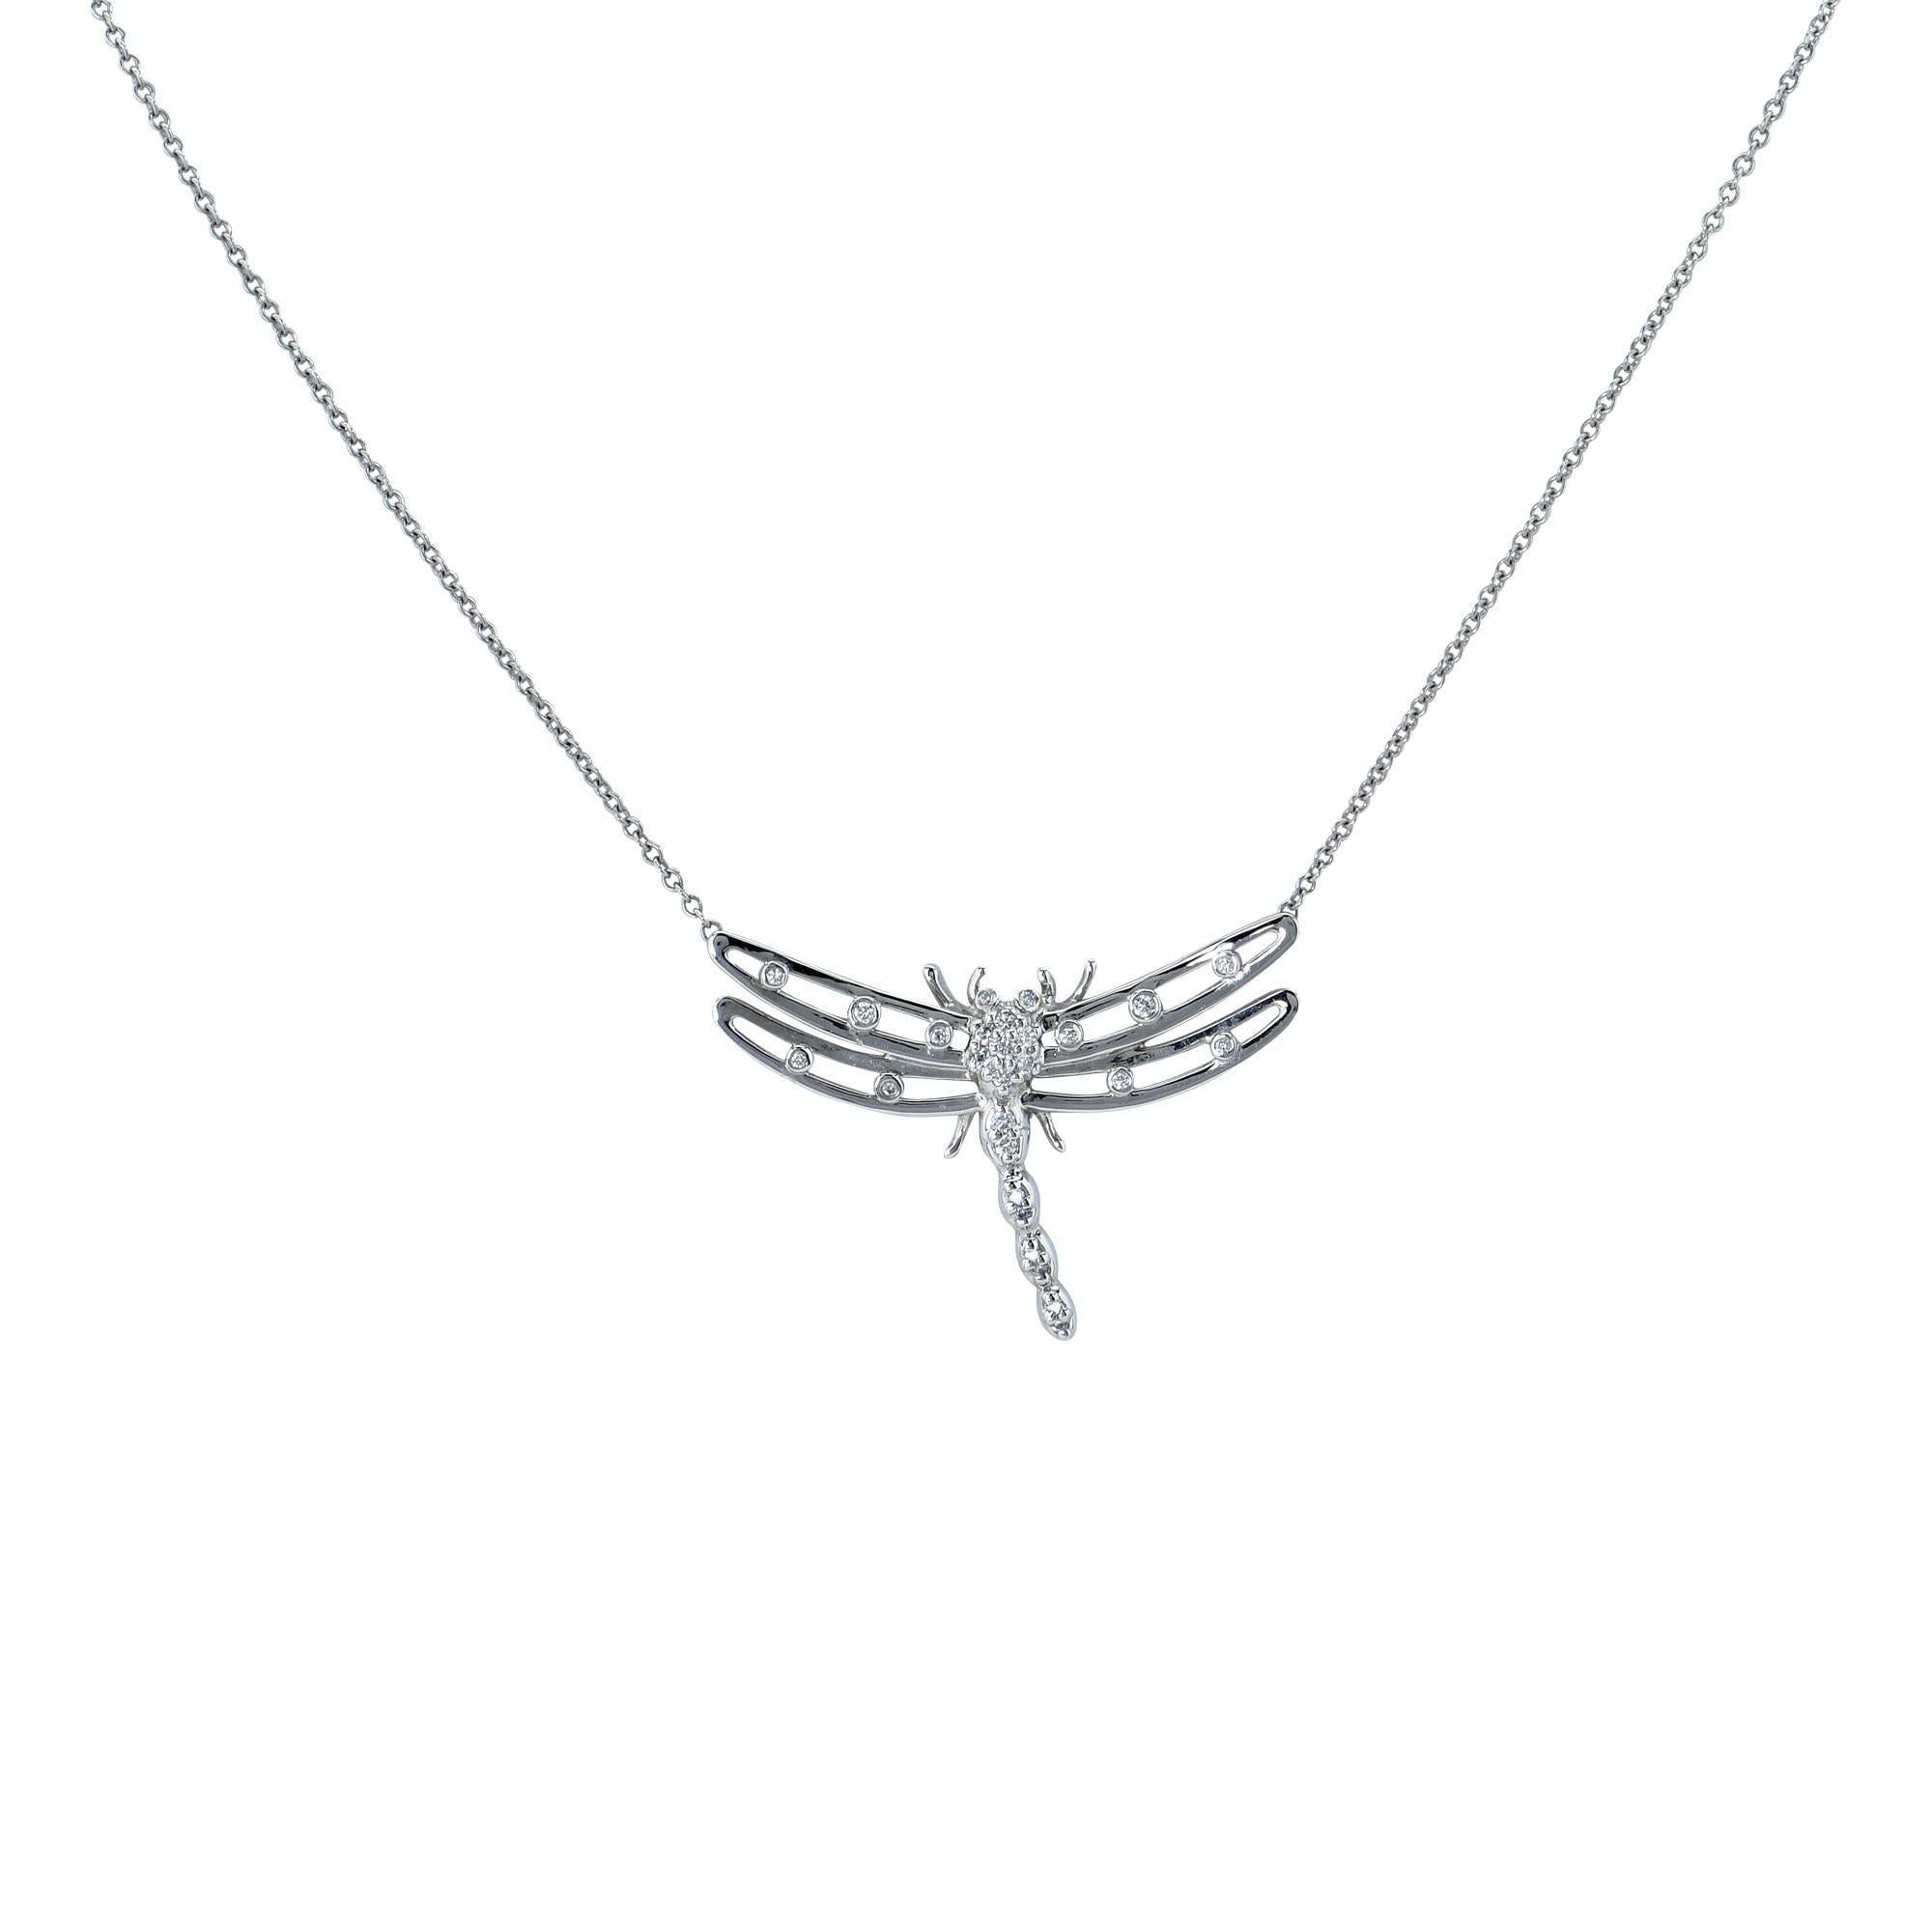 Elegant Tiffany & Co. Diamond Dragonfly Necklace crafted in platinum featuring 25 round brilliant cut diamonds weighing approximately .15cts total.

The chain is 16 inches in length. The pendant is 1.18 inches in width by .76 inch in height.
It